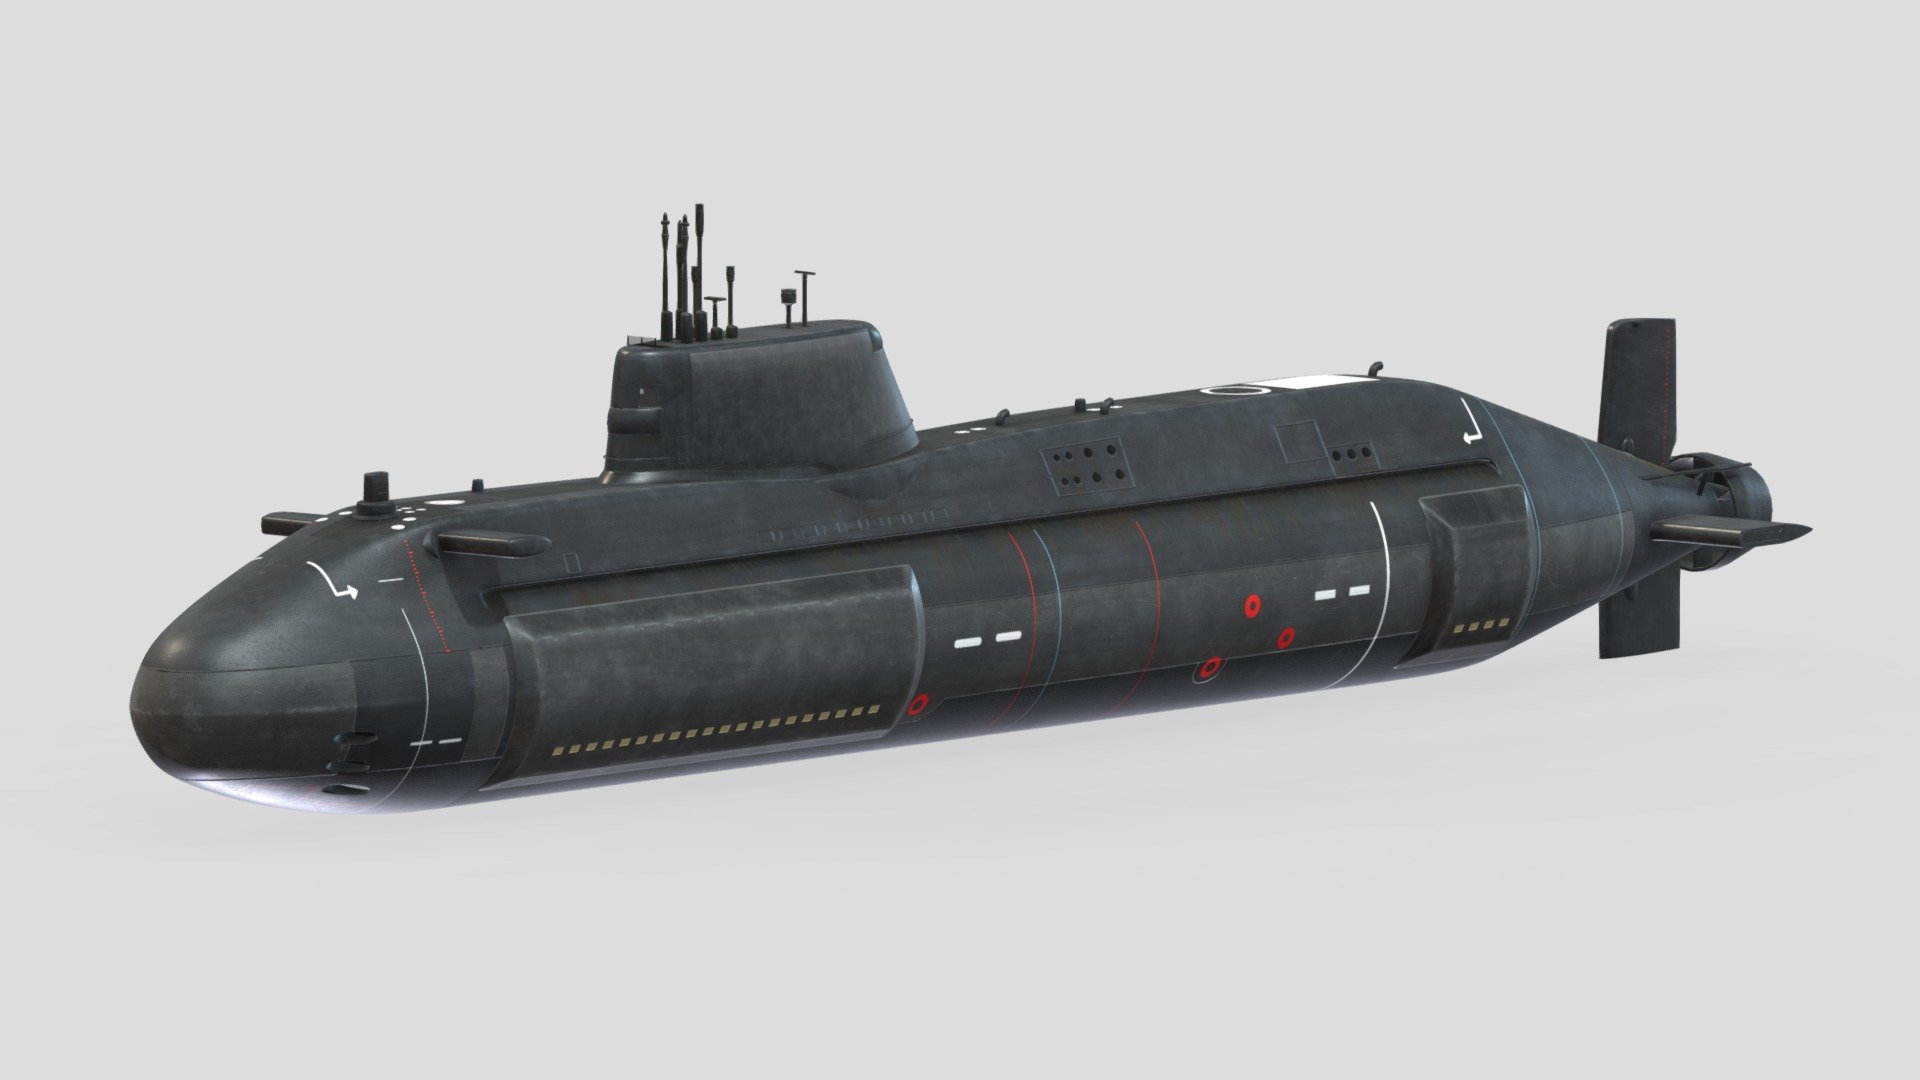 Hi, I'm Frezzy. I am leader of Cgivn studio. We are a team of talented artists working together since 2013.
If you want hire me to do 3d model please touch me at:cgivn.studio Thanks you! - HMS Artful SSNs Submarine - 3D model by Frezzy3D 3d model